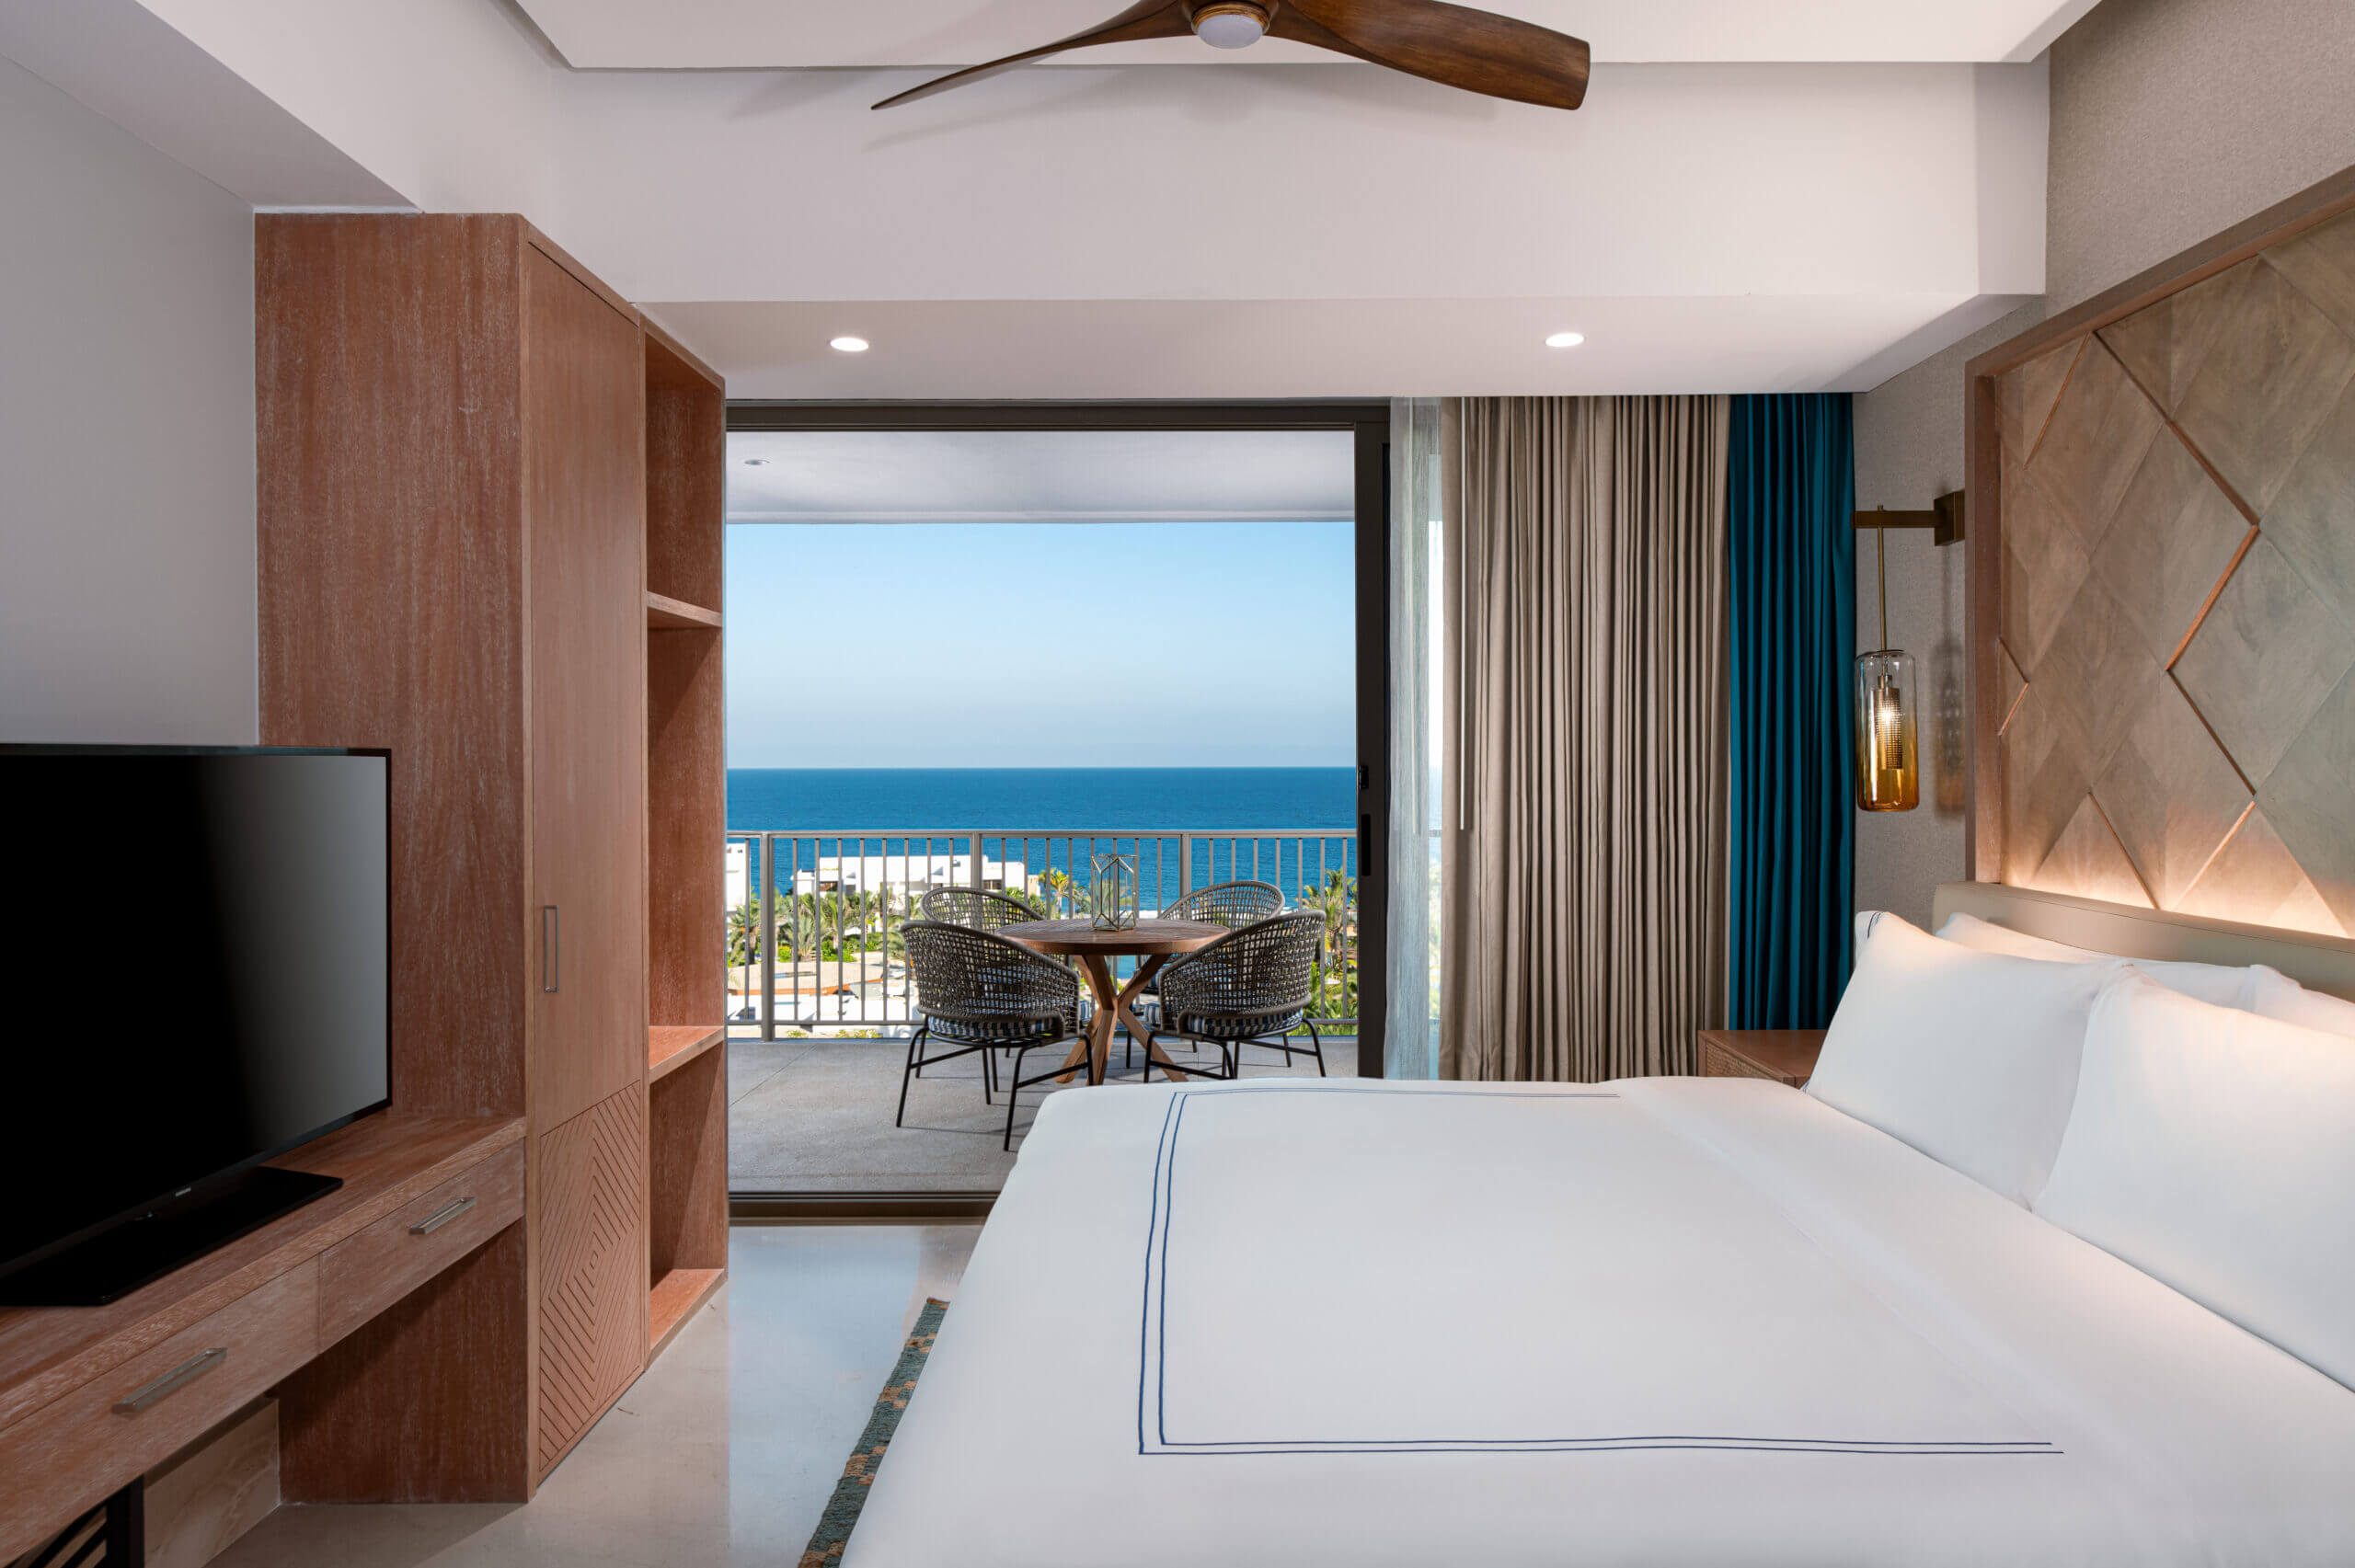 Bed in white sheets, TV and Terrace overlooking the Pacific Ocean